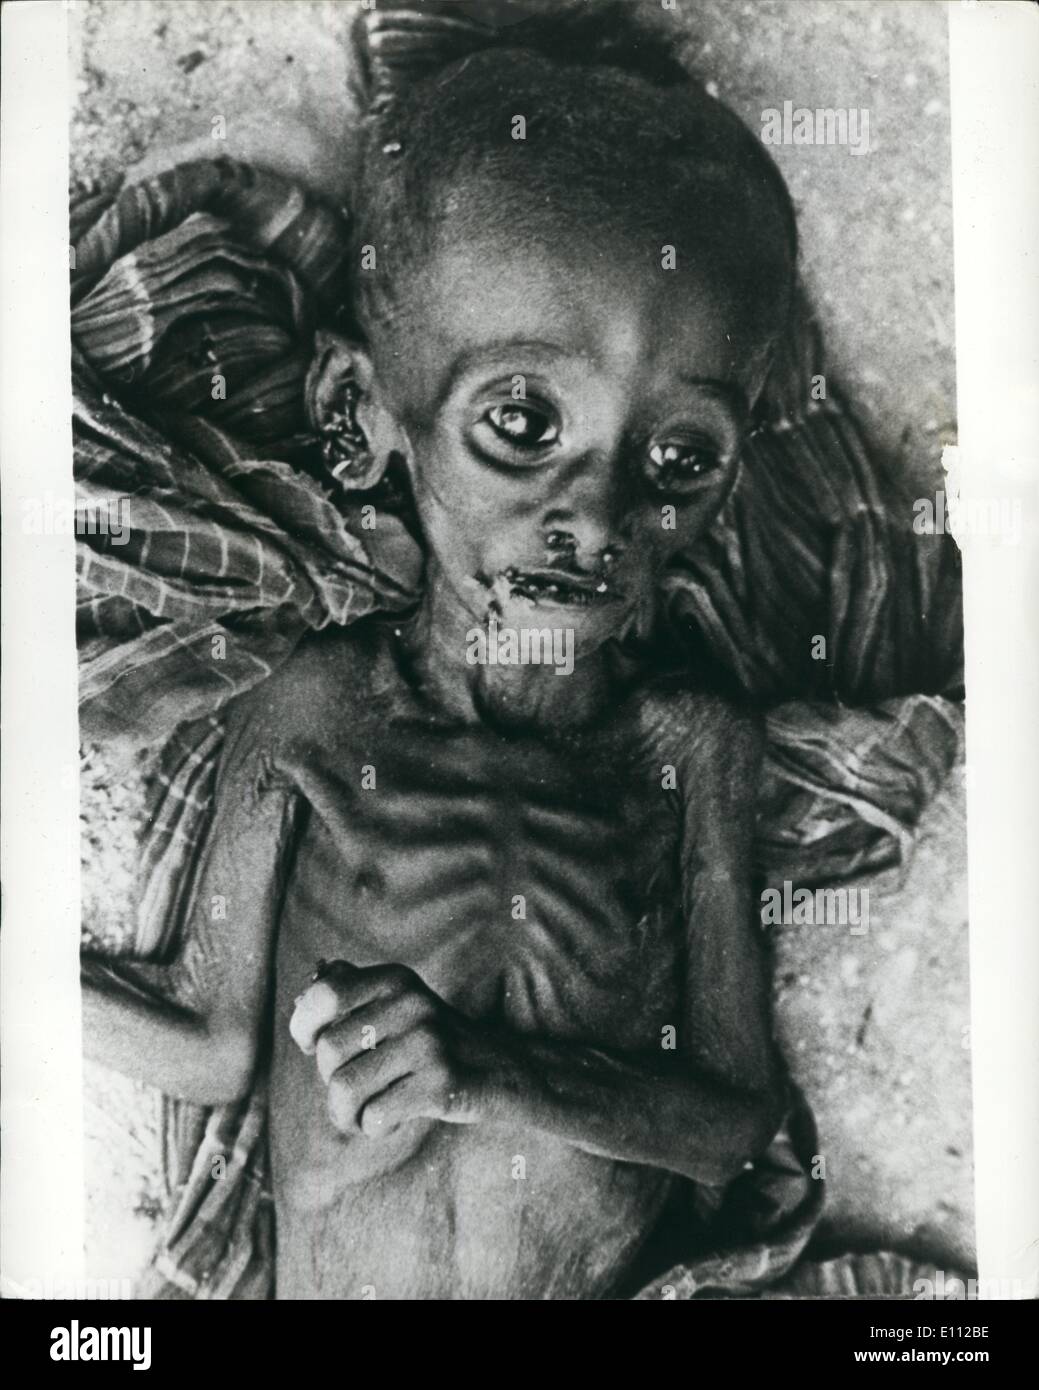 May 05, 1975 - Victim of famine: This picture, recently taken in Ethiopia by an Oxfam nurse, shows the spelling effects of the famine that has struck the nomadic people of the Ogaden desert region in the S.E. of the country. The famine has already claimed the lives of hundreds of children like this one, and over 40,000 people have crowded into relief camps that have been setup in remote desert villages. The photograph was taken by Stephanie symmonds when working at the intensive feeding unit she helped to run at Gode near the Somali border. Stock Photo